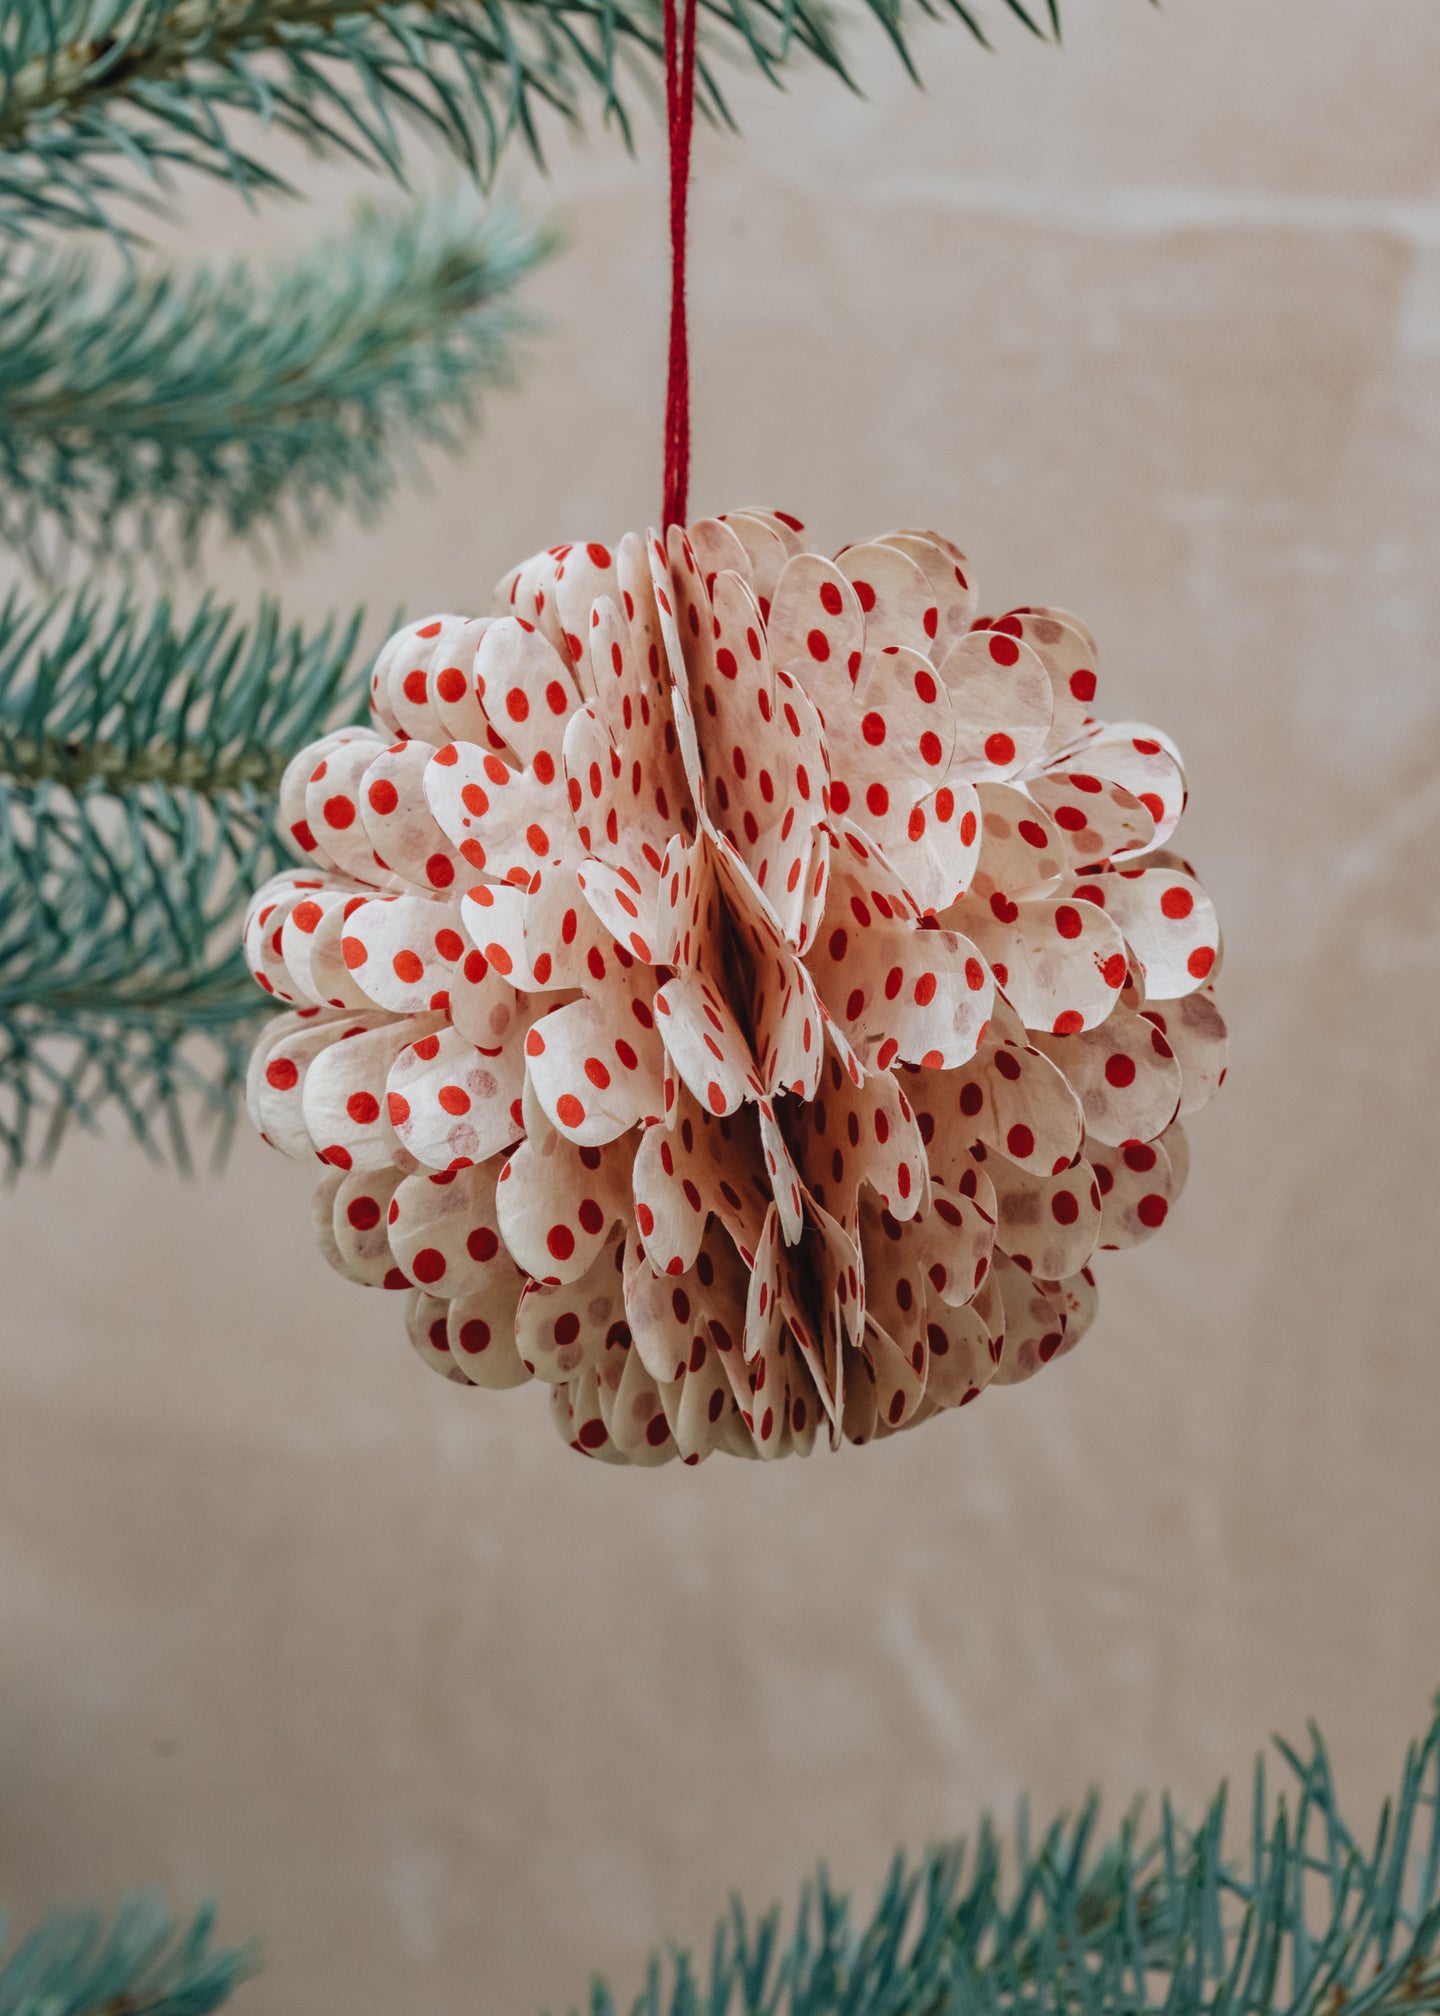 AfroArt Honeycomb Folding Flower Ornament in Red and White